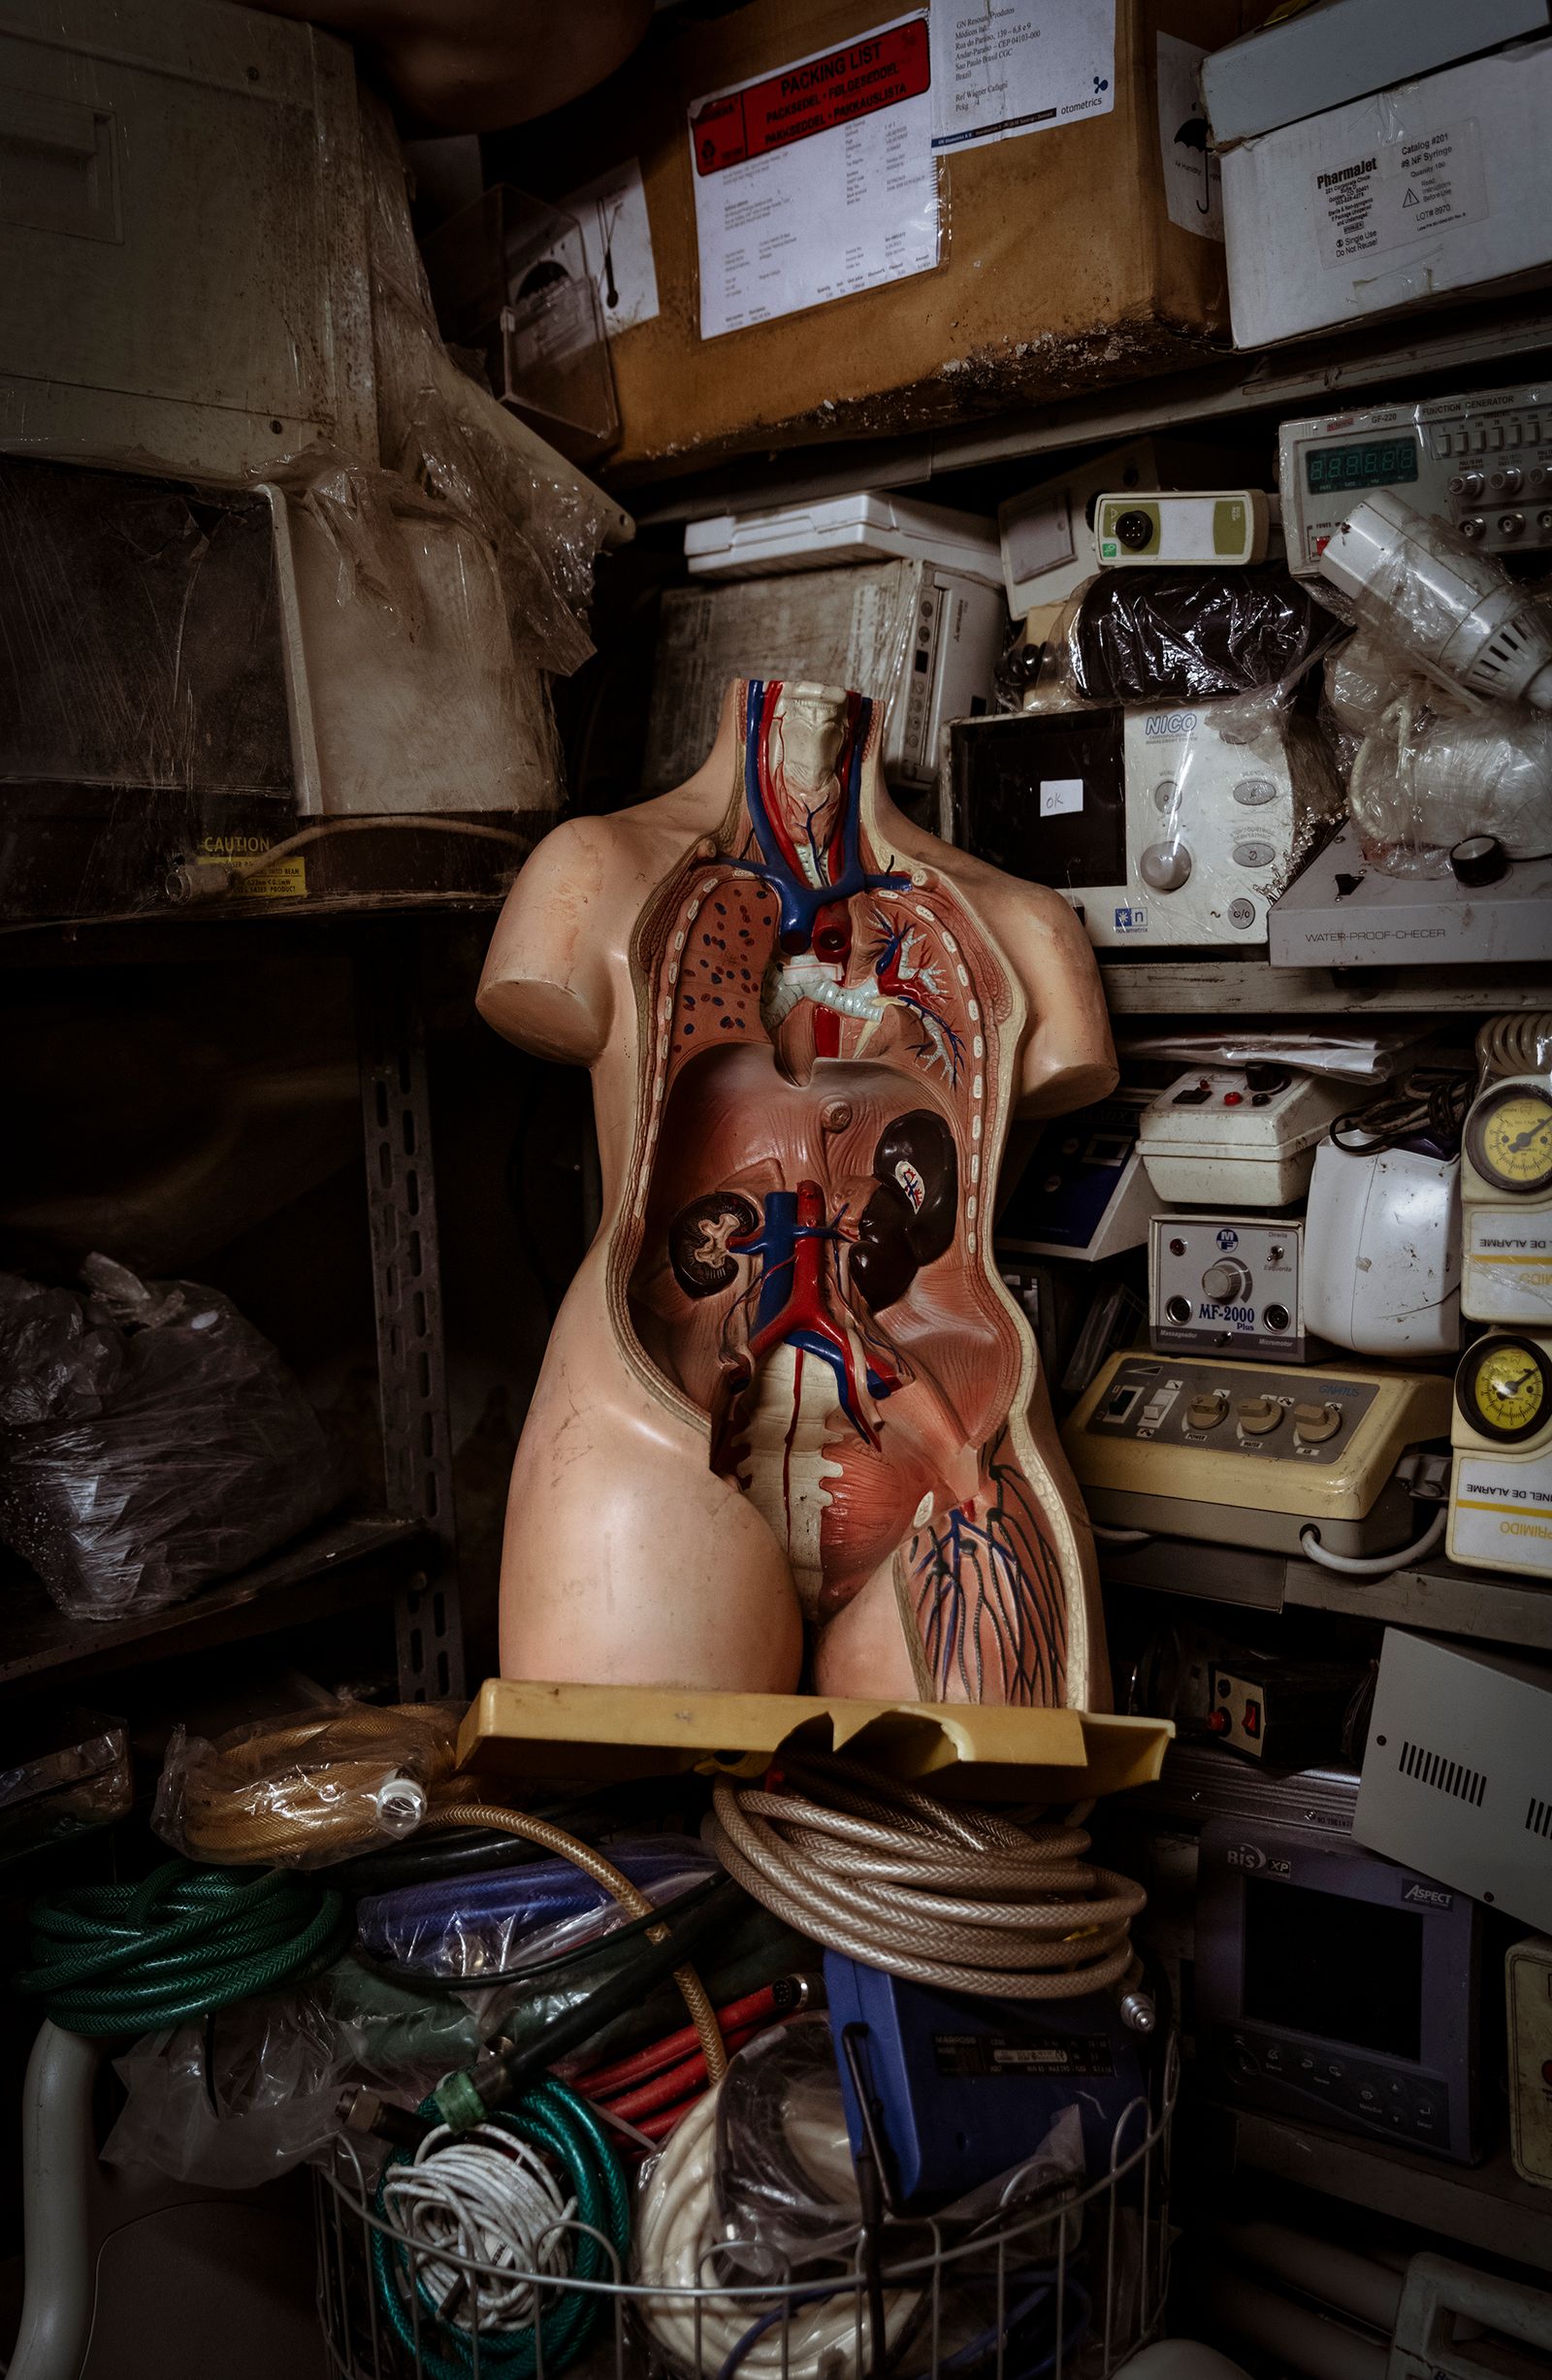 © Gui Christ - An anatomical dummy found in a old mansion turned into a hospital junkyard